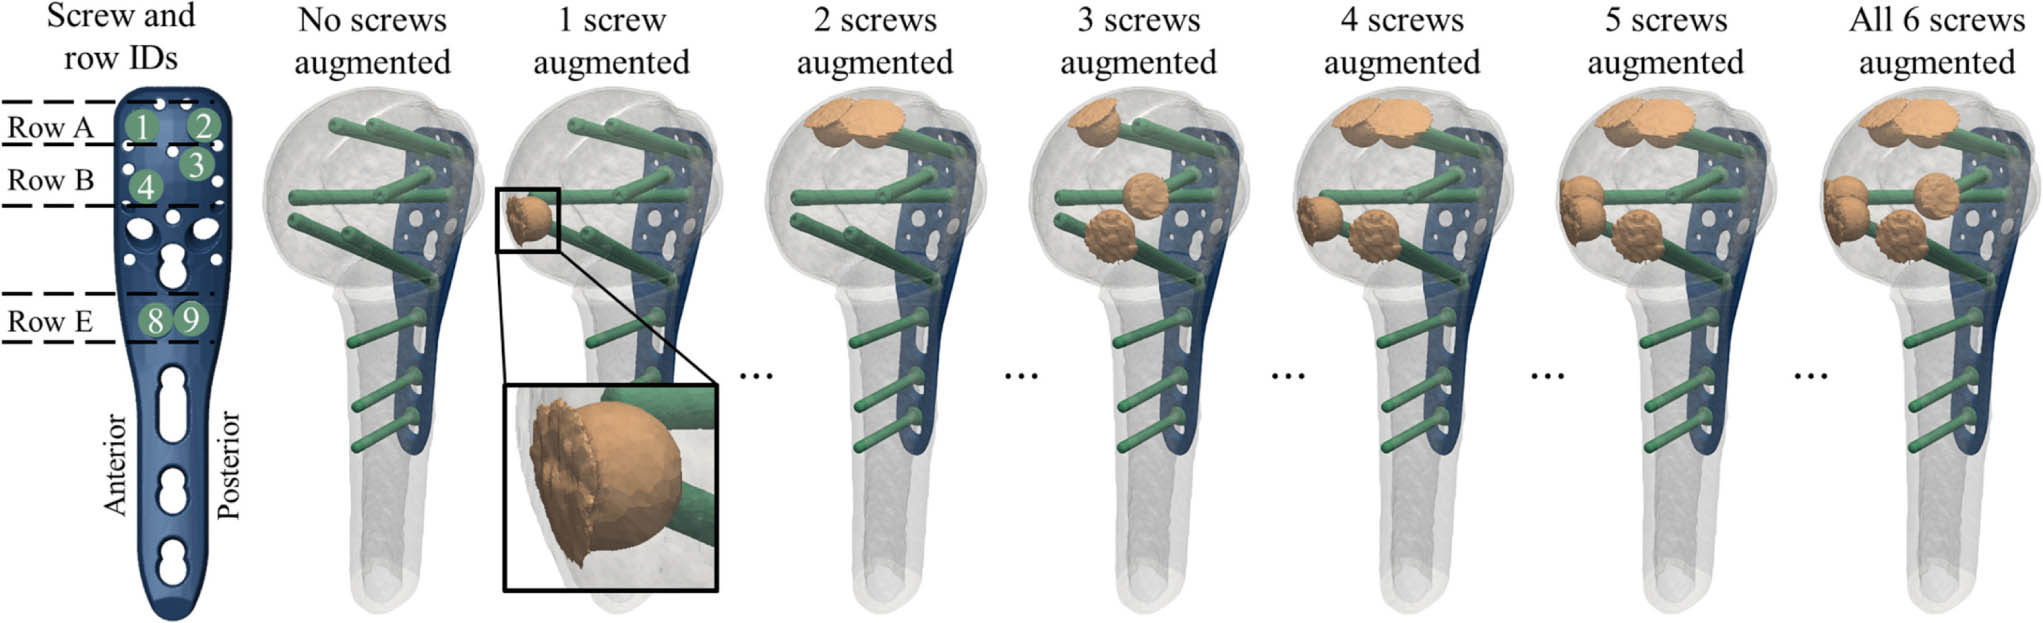 Fig. 1 
            Definition of the screw IDs and row IDs of the proximal humerus internal locking system (PHILOS) plate and anatomical orientation for left humeri (far left); and illustration of the fracture model with transparent fragments to show the virtual instrumentation, for exemplary configurations of zero to six augmented screws (left to right). Note that there were a total of 64 configurations for each subject. A close-up view of a cemented cloud is shown for the case of one augmented screw, demonstrating redistribution of cement material at the subchondral bone interface.
          